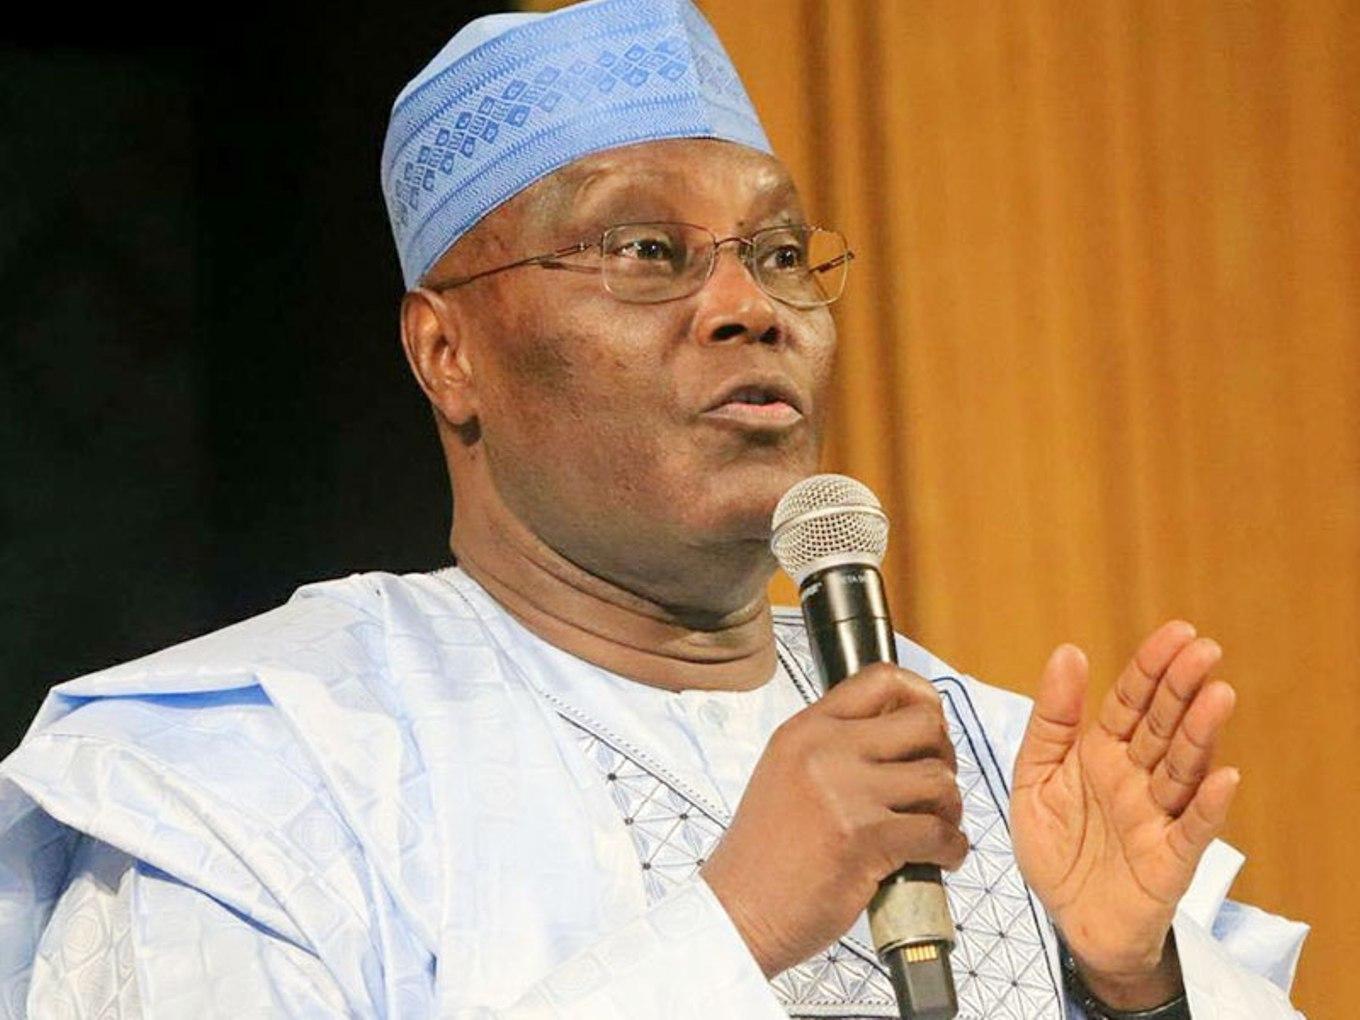 Fuel scarcity: Atiku vows to block leakages, liberalize oil and gas sector